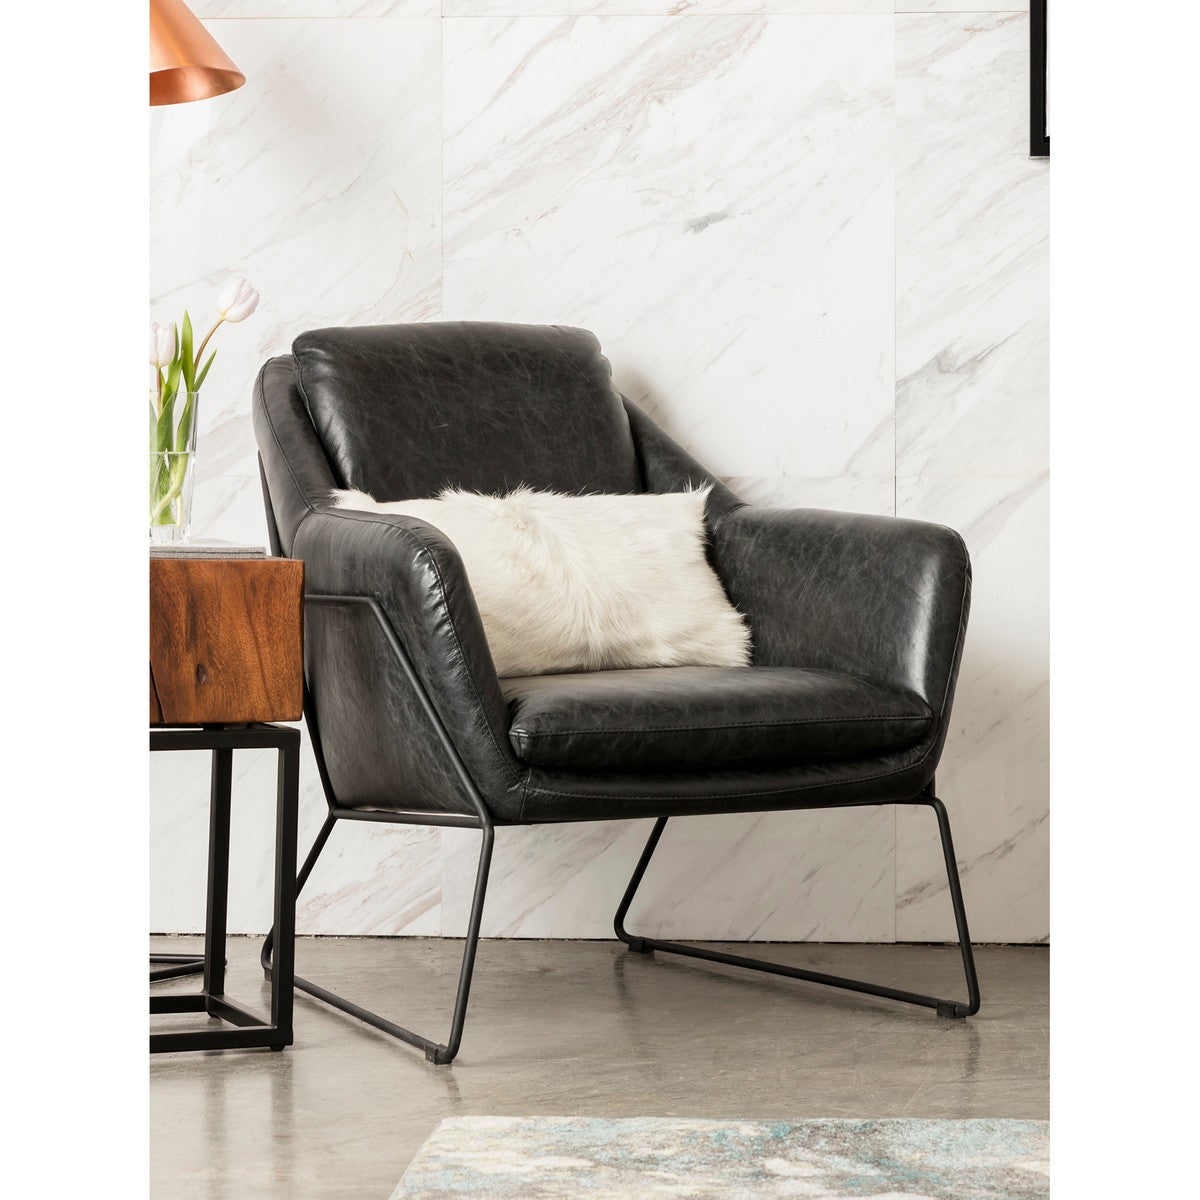 Moe's Home Collection Greer Club Chair Black - PK-1056-02 - Moe's Home Collection - lounge chairs - Minimal And Modern - 1